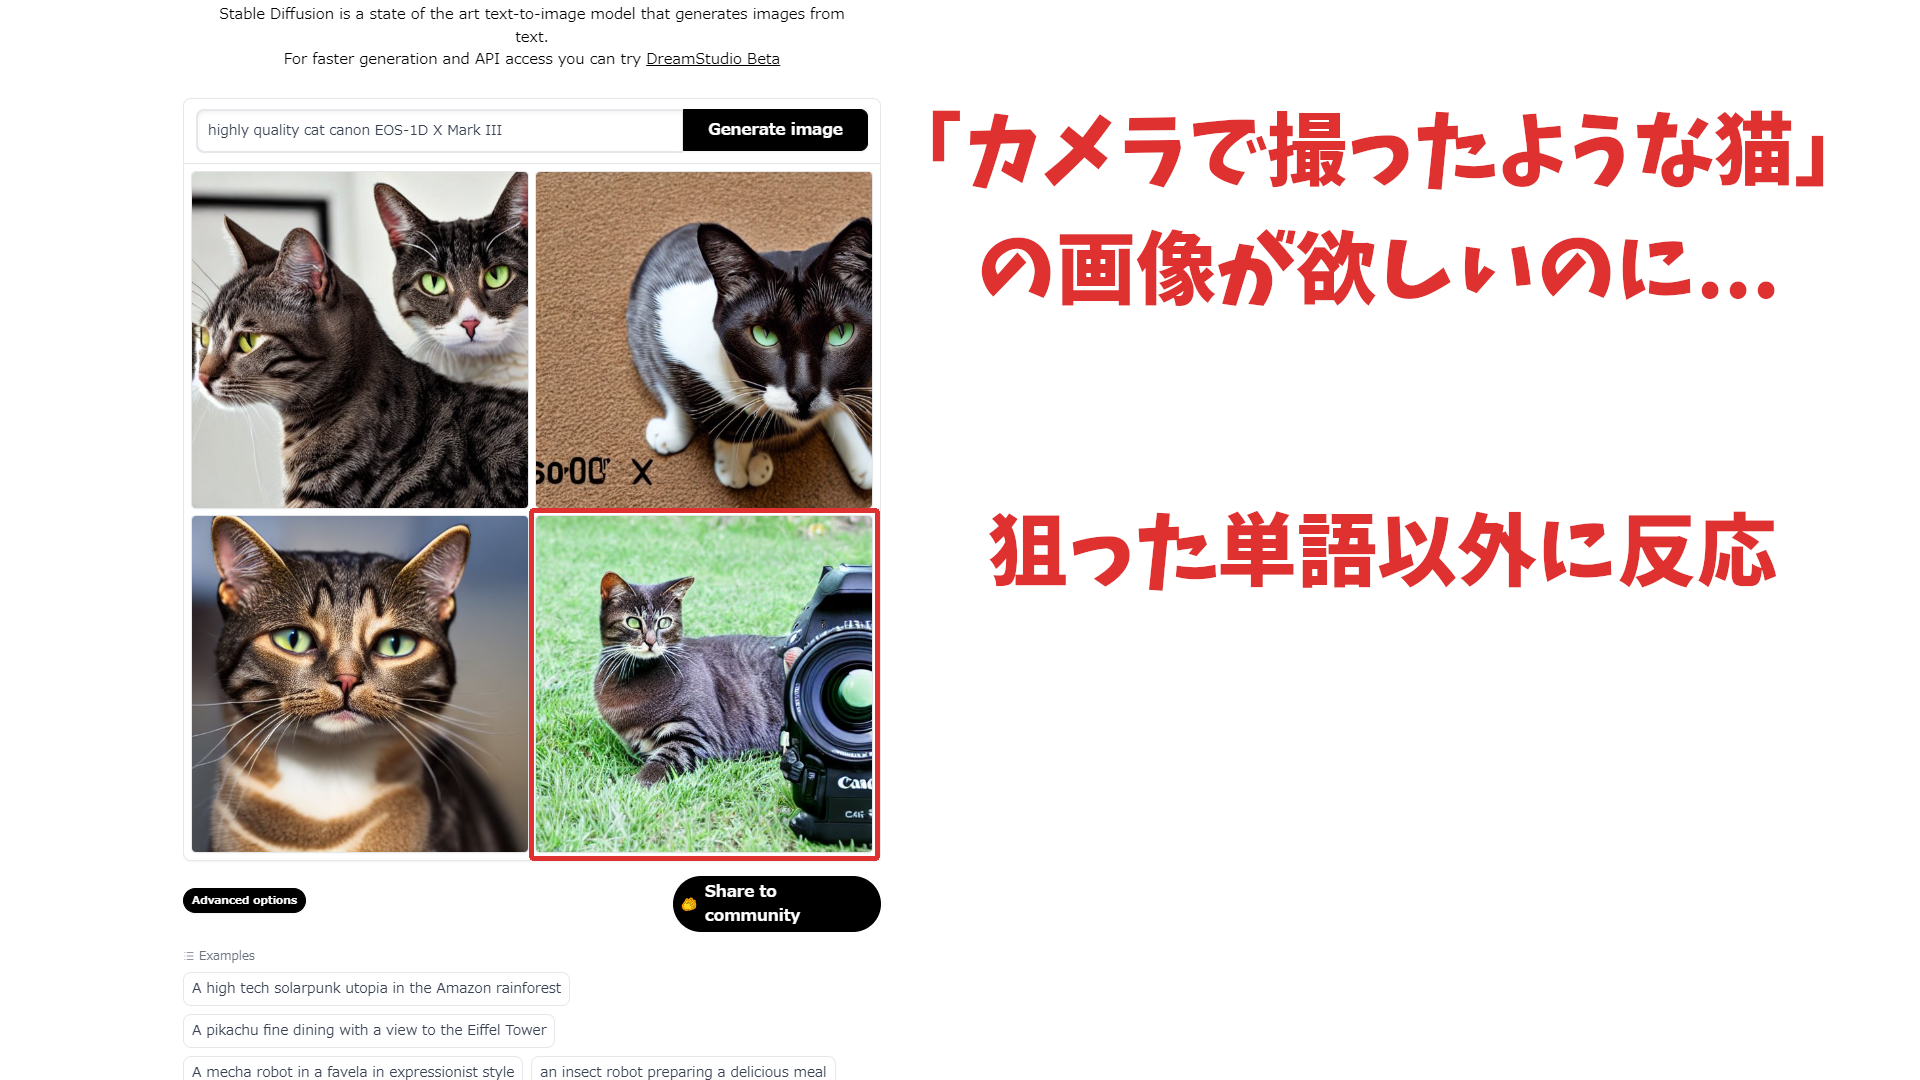 「highly-quality-cat -canon-EOS-1D-X -Mark-III」で画像生成した結果